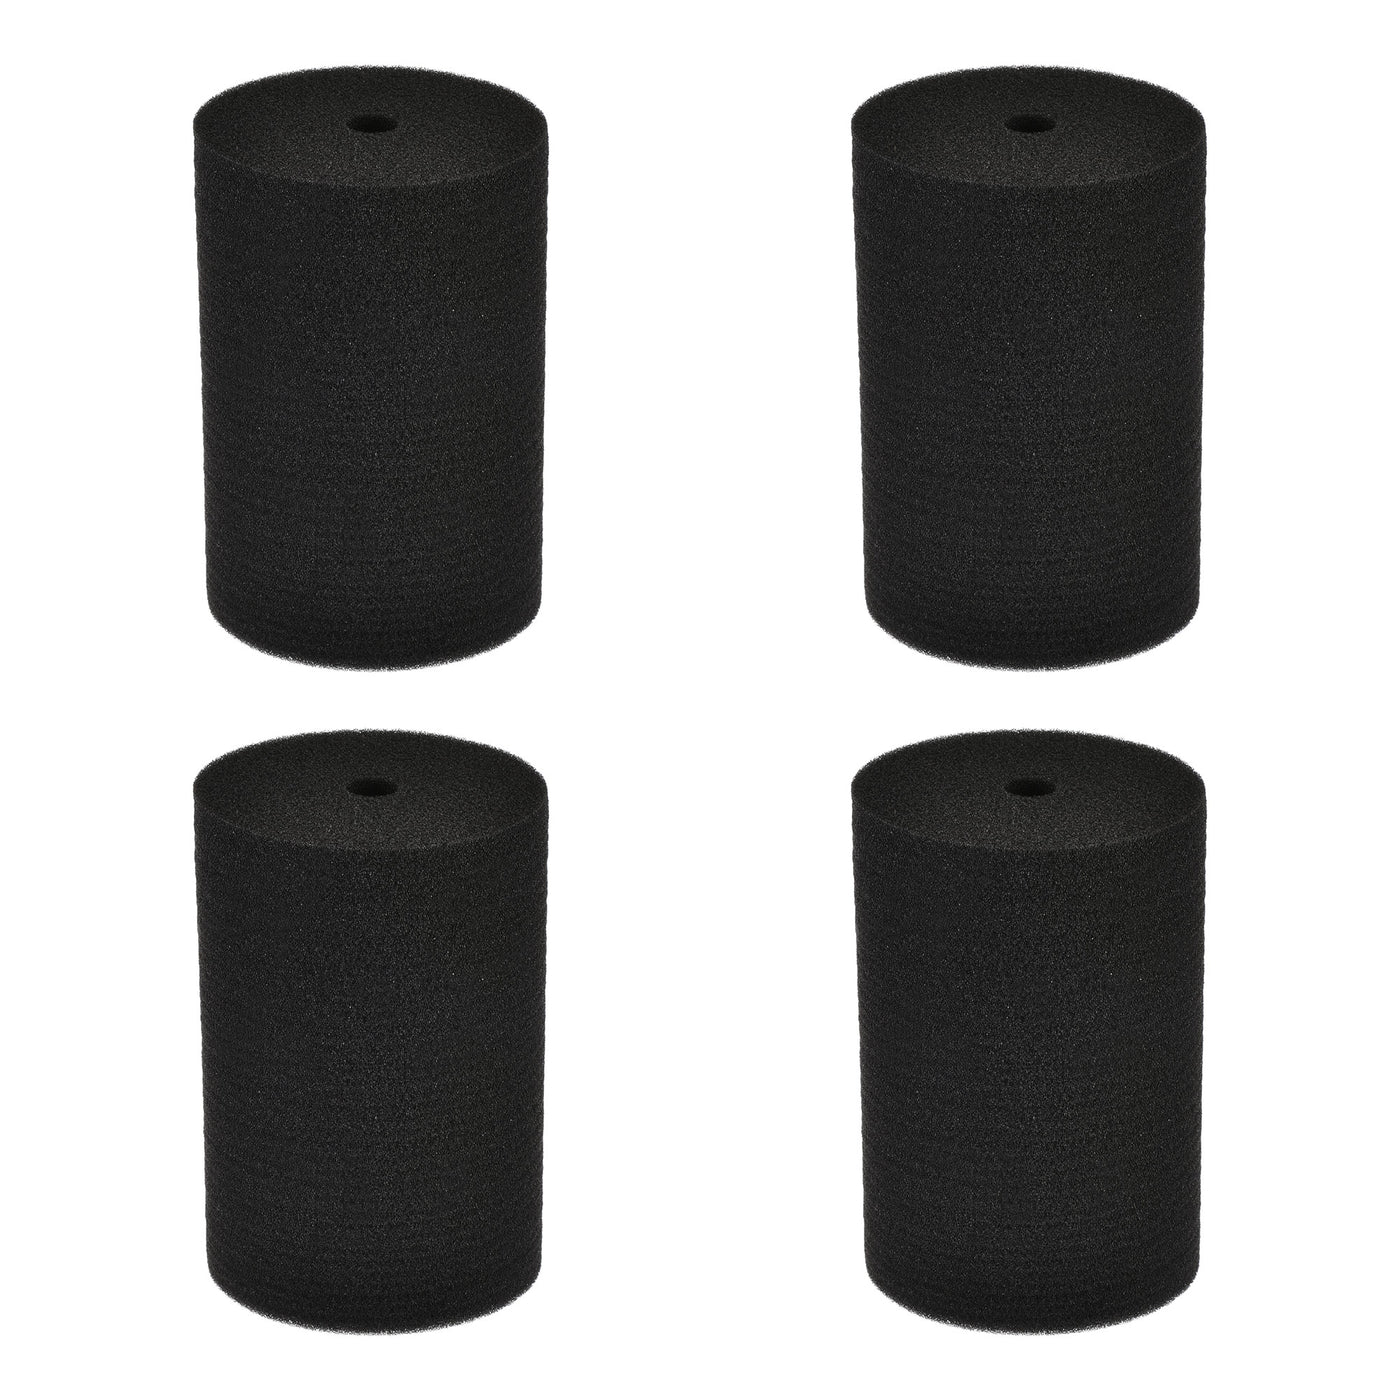 uxcell Uxcell Cup Turner Foam, Black 75x72x120mm for 3/4 Inch PVC Pipe Tumbler 10oz-40oz 4 Pcs